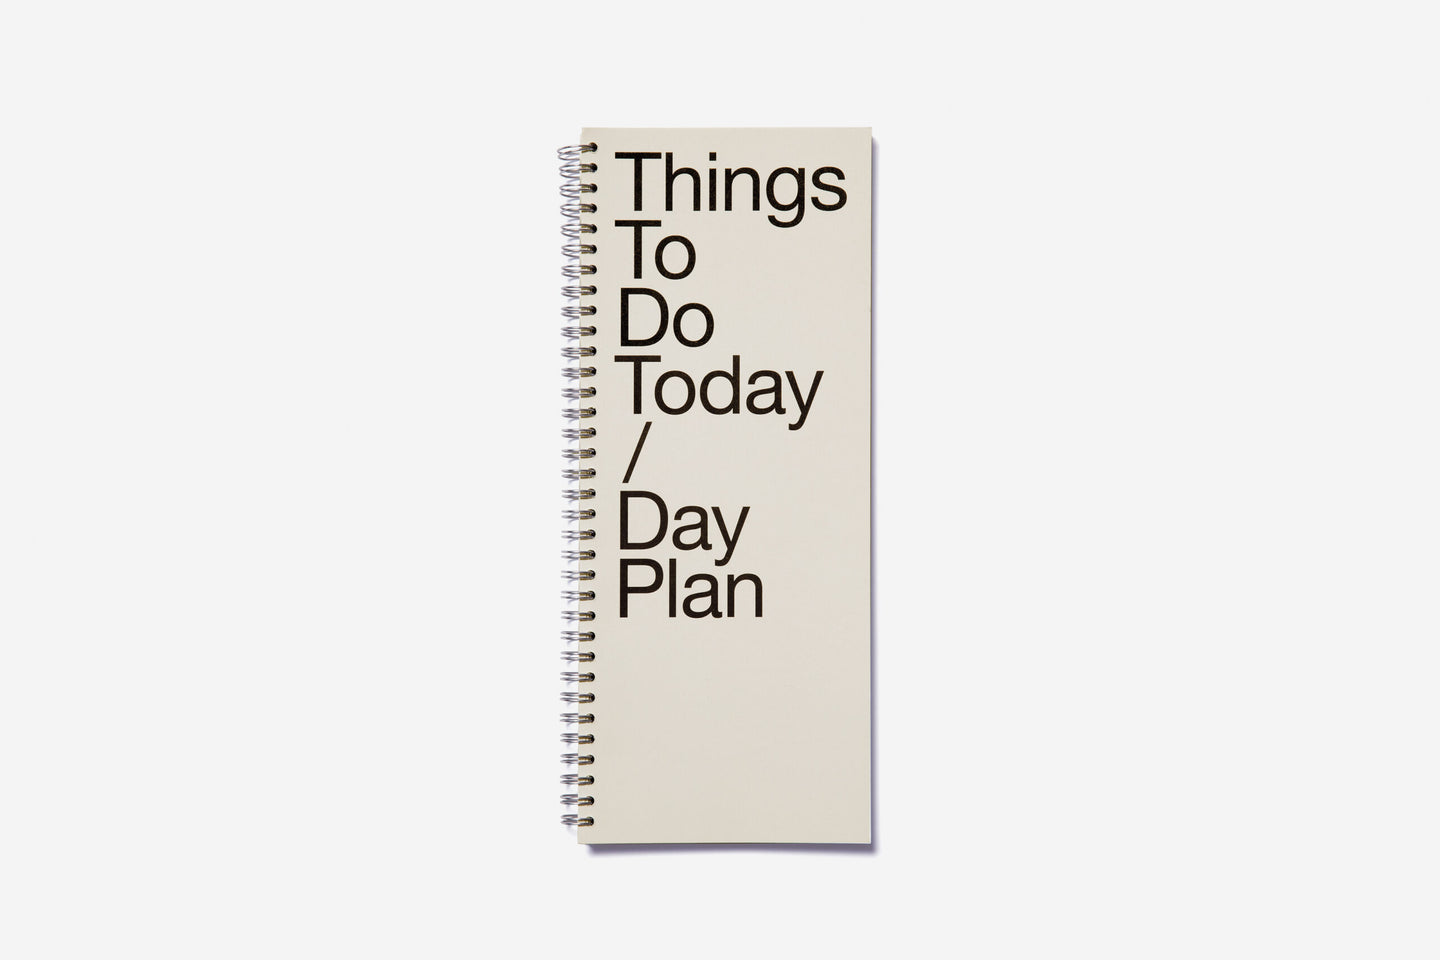 Things To Do Today by Marjolein Delhaas – TAHIN